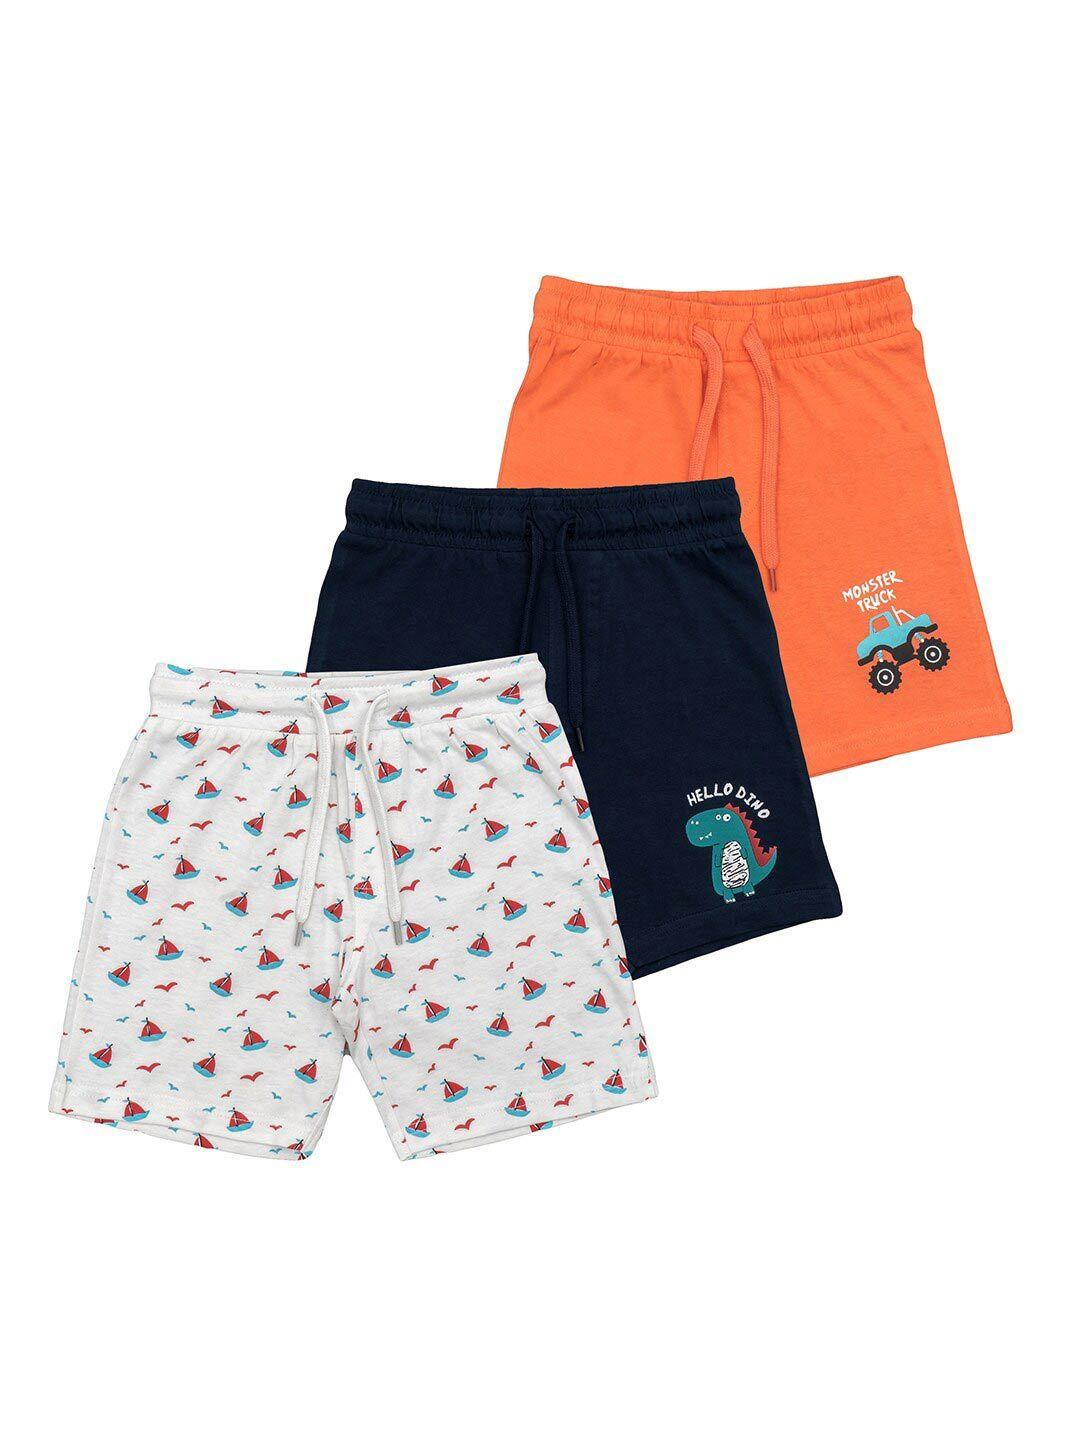 baesd pack of 3 boys assorted cotton shorts